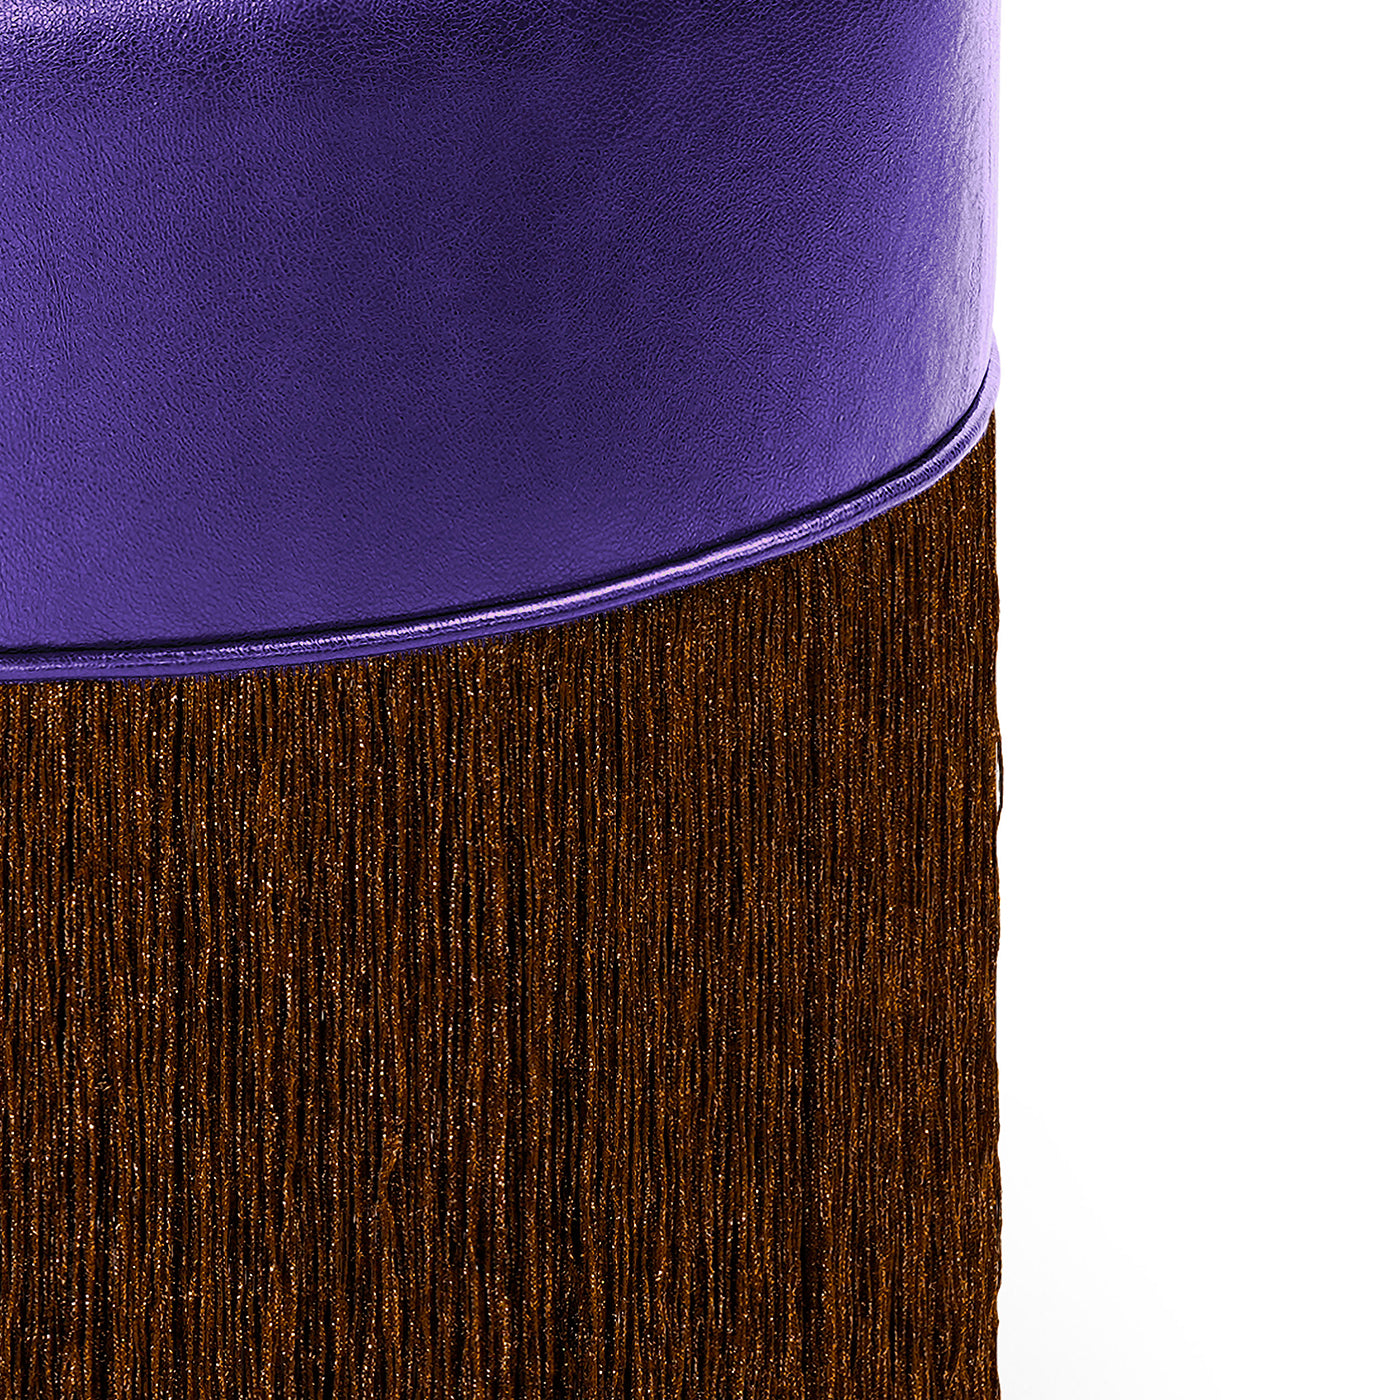 Gleaming Purple Metallic Leather with Brown Lurex Fringes Pouf - Alternative view 1